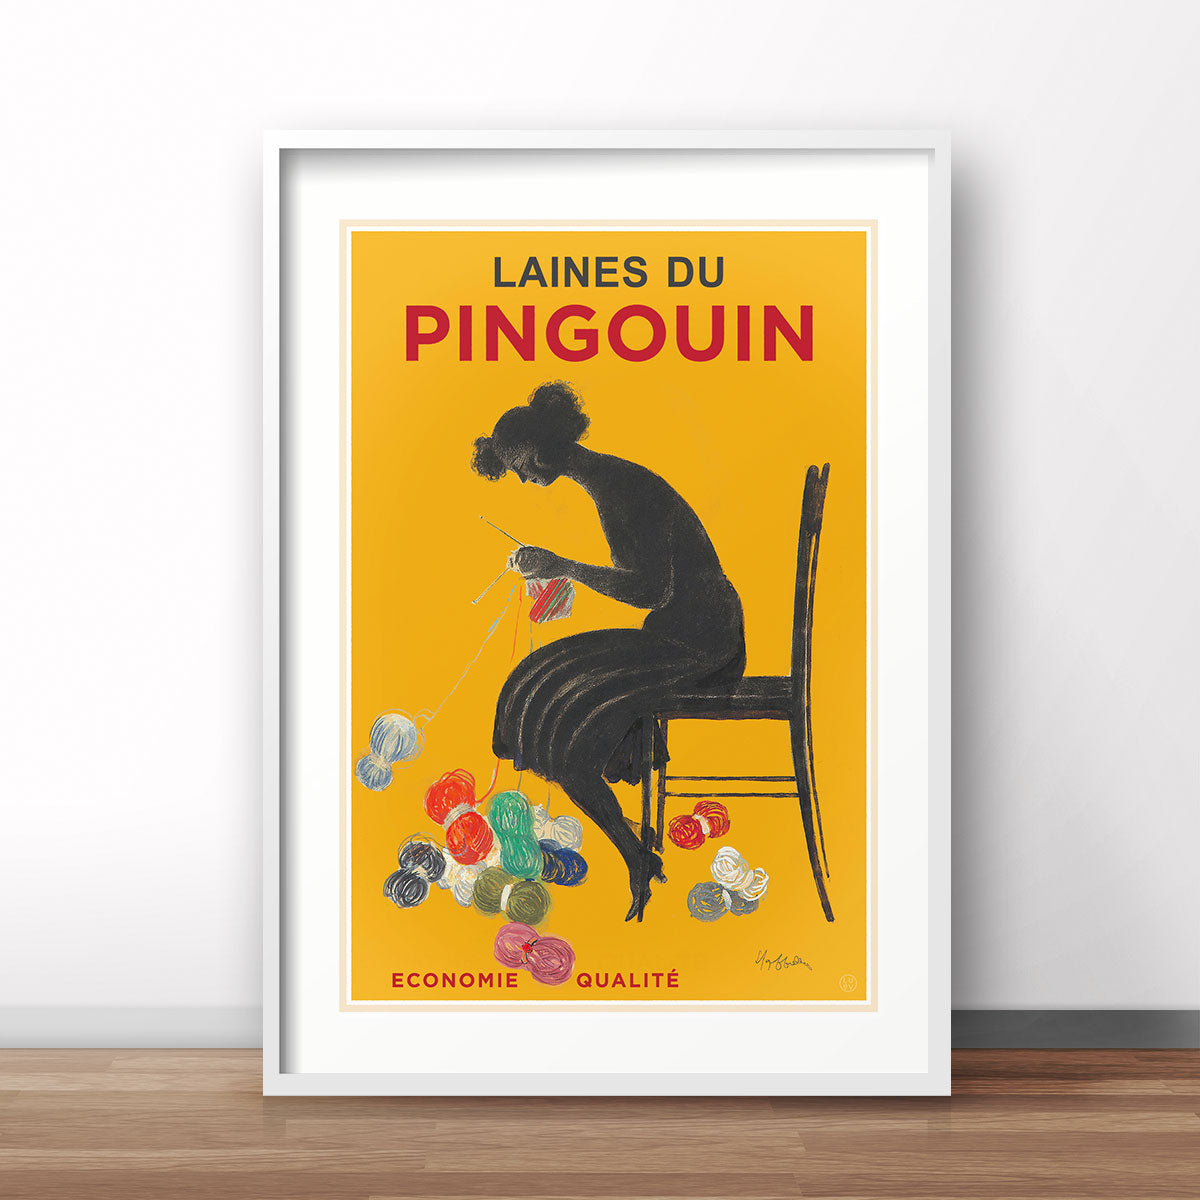 Laines du Pingouin retro vintage advertising poster print from Places We Luv